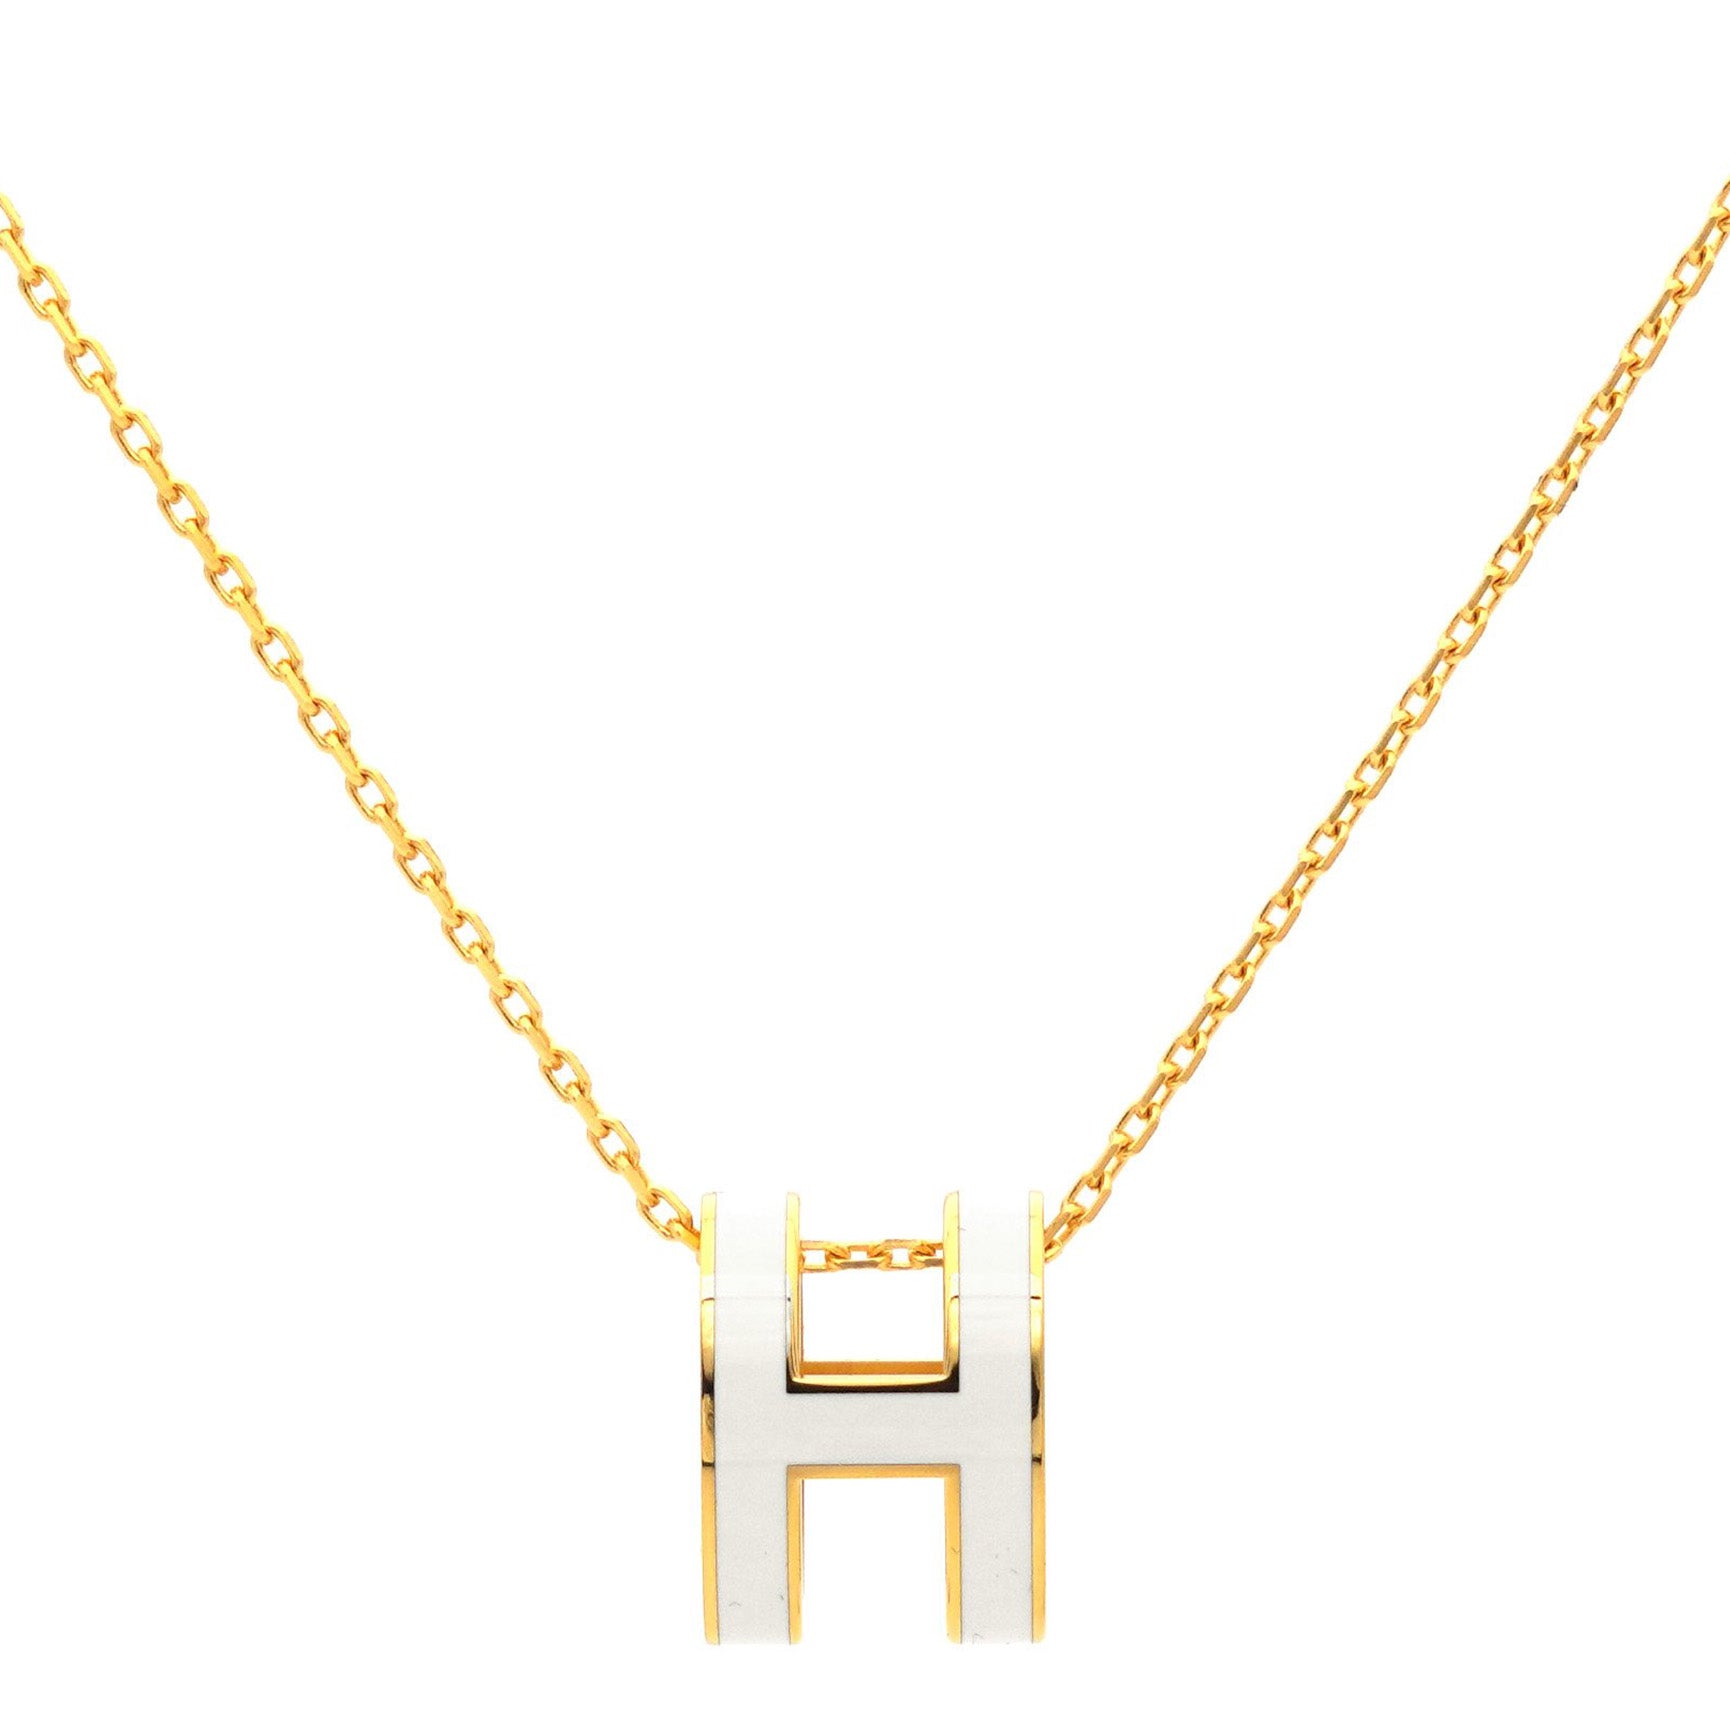 H White Lacquer Gold Plated Pendant Necklace